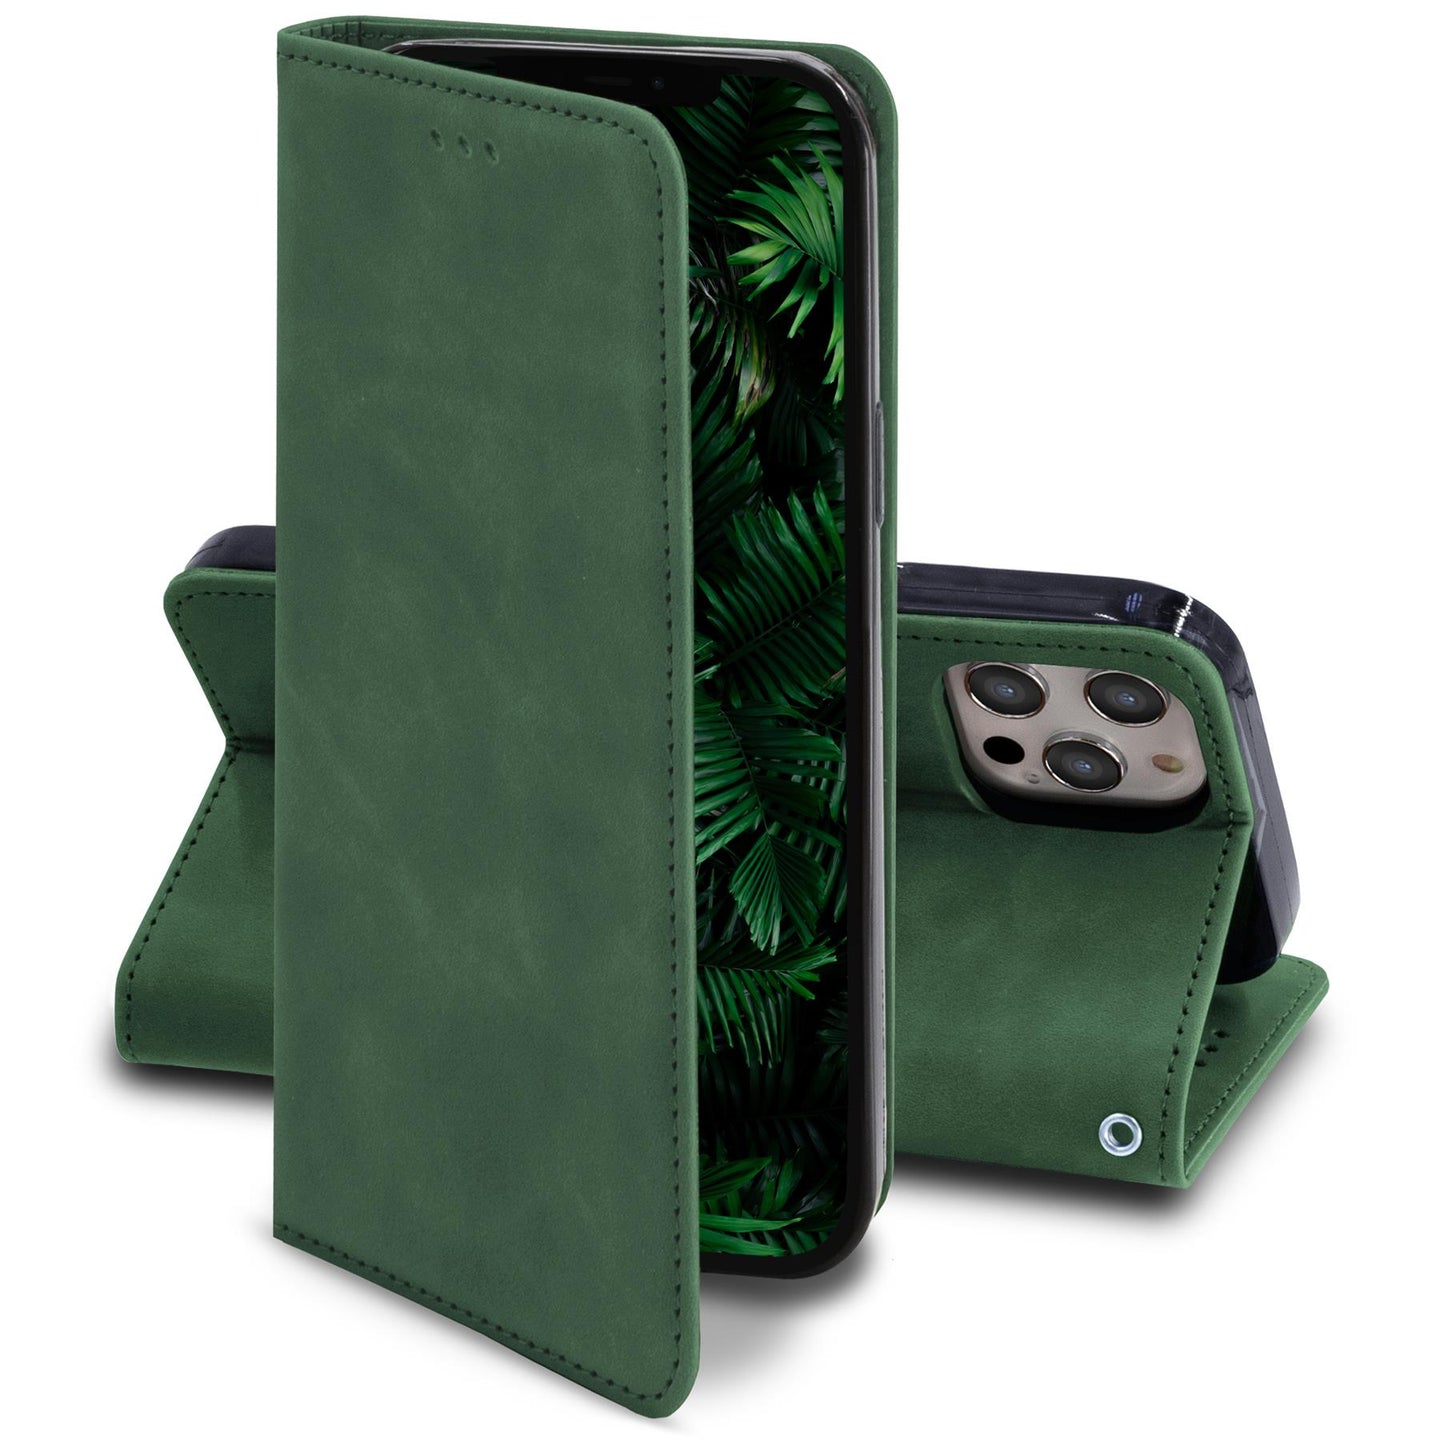 Moozy Marble Green Flip Case for iPhone 12, iPhone 12 Pro - Flip Cover Magnetic Flip Folio Retro Wallet Case